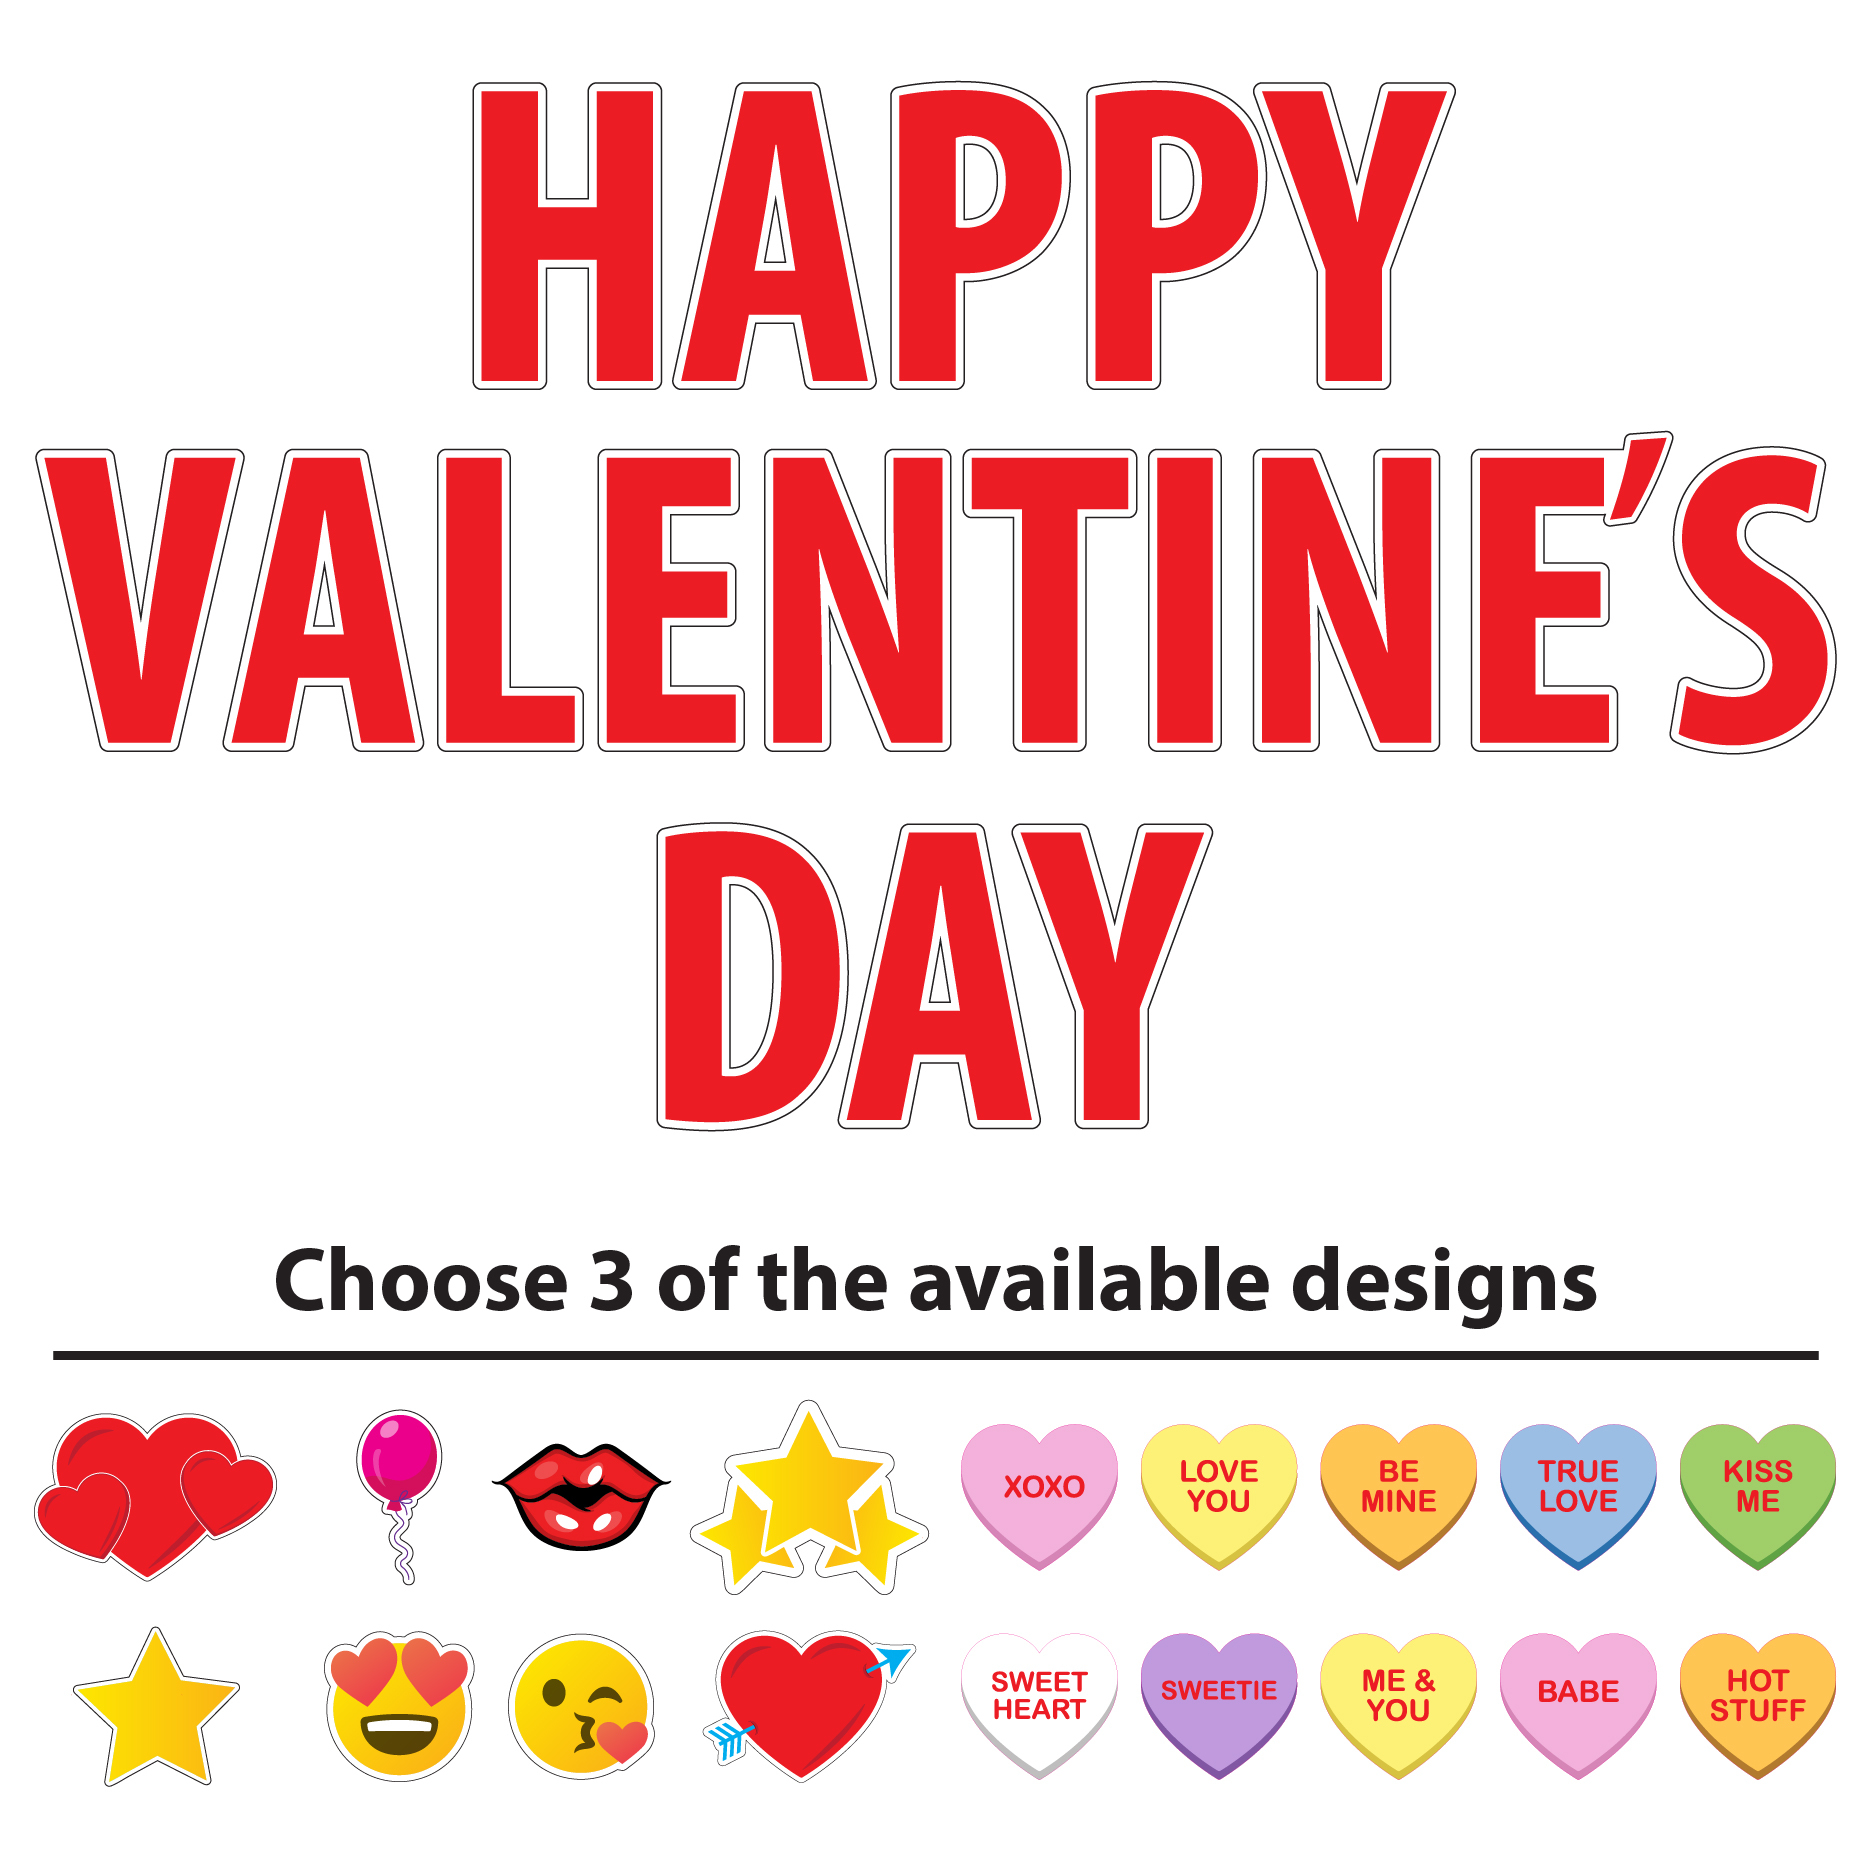 1.) Happy Valentine's Day Yard Sign Package